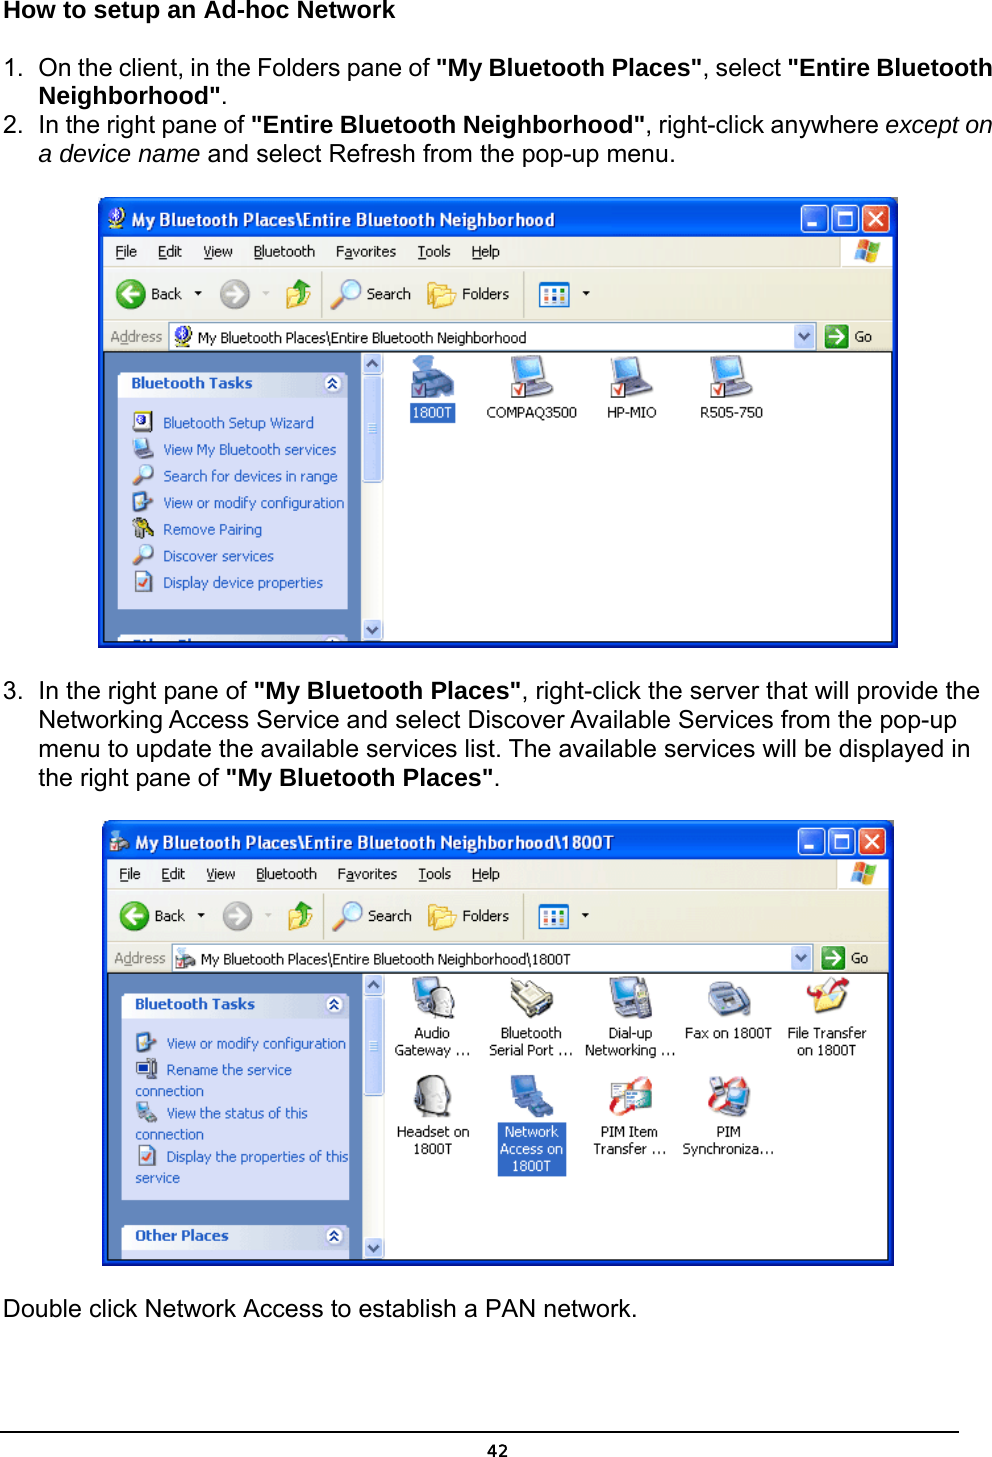   42How to setup an Ad-hoc Network 1.  On the client, in the Folders pane of &quot;My Bluetooth Places&quot;, select &quot;Entire Bluetooth Neighborhood&quot;. 2.  In the right pane of &quot;Entire Bluetooth Neighborhood&quot;, right-click anywhere except on a device name and select Refresh from the pop-up menu.  3.  In the right pane of &quot;My Bluetooth Places&quot;, right-click the server that will provide the Networking Access Service and select Discover Available Services from the pop-up menu to update the available services list. The available services will be displayed in the right pane of &quot;My Bluetooth Places&quot;.  Double click Network Access to establish a PAN network.  